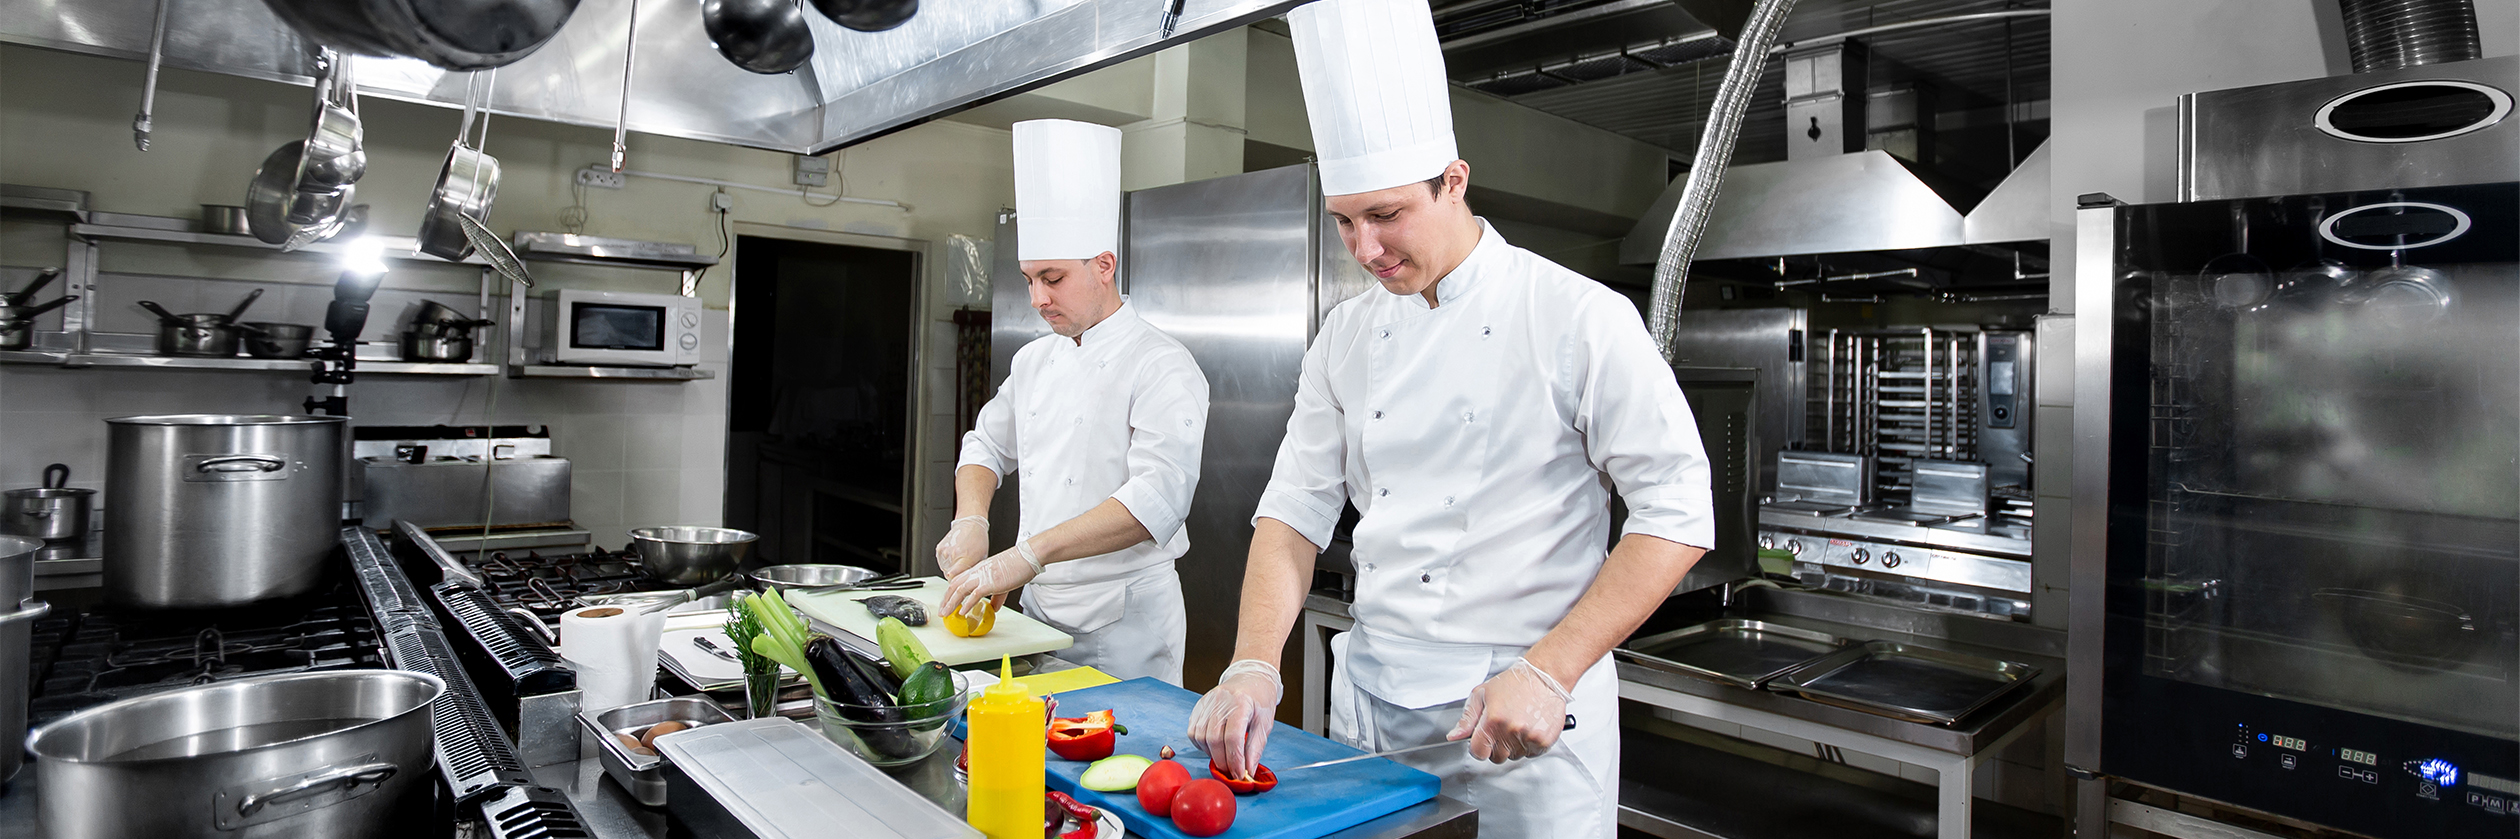 two chefs preparing vegetables in a commercial kitchen